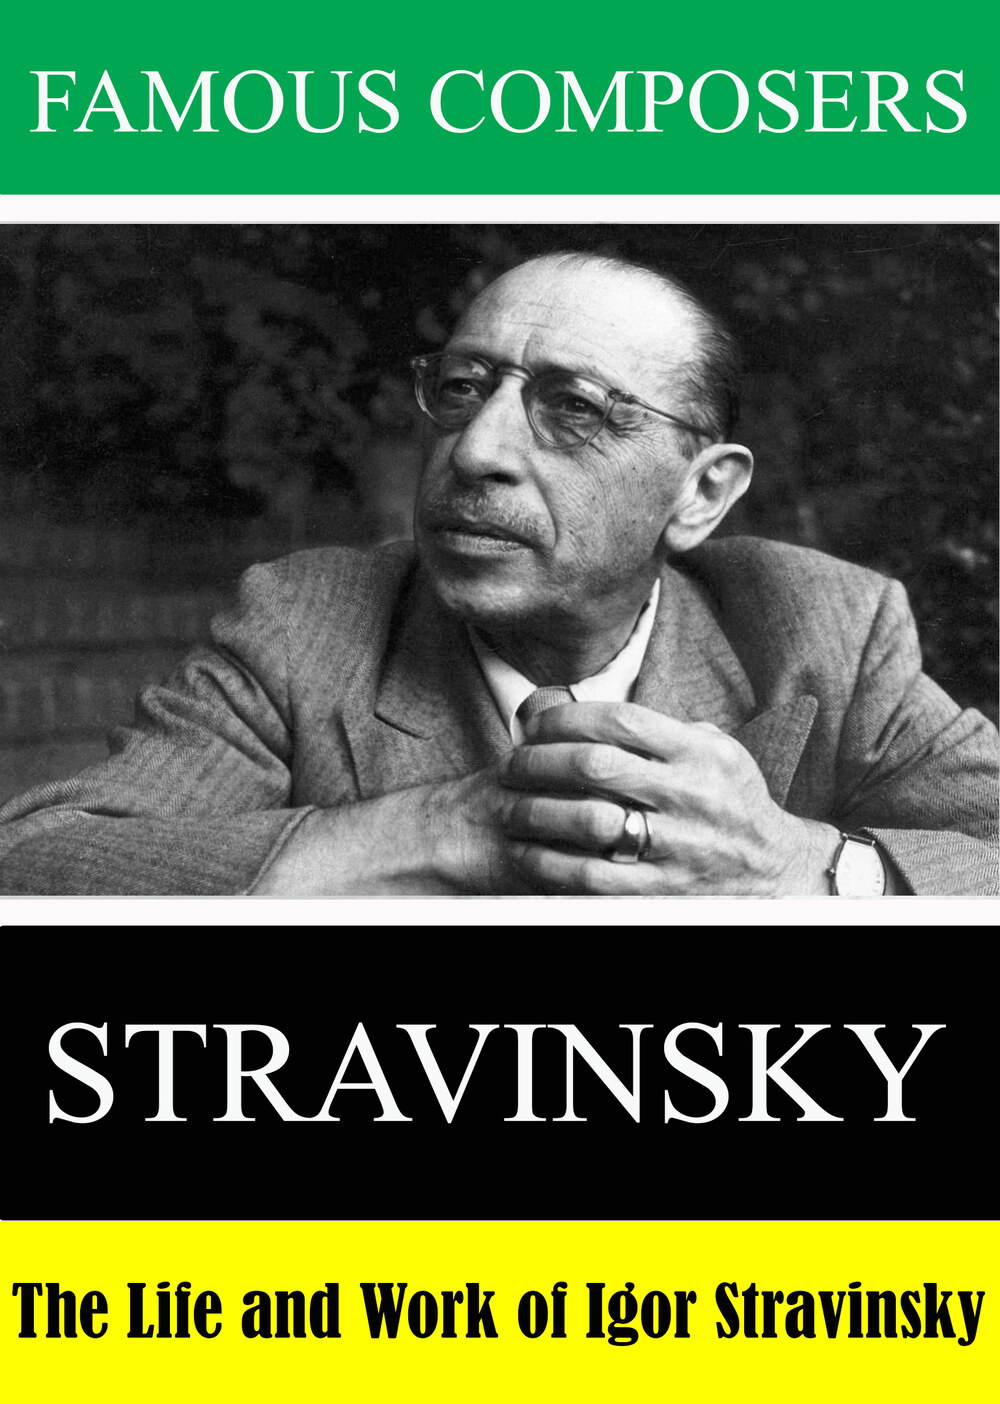 L7930 - Famous Composers: The Life and Work of  Igor Stravinsky